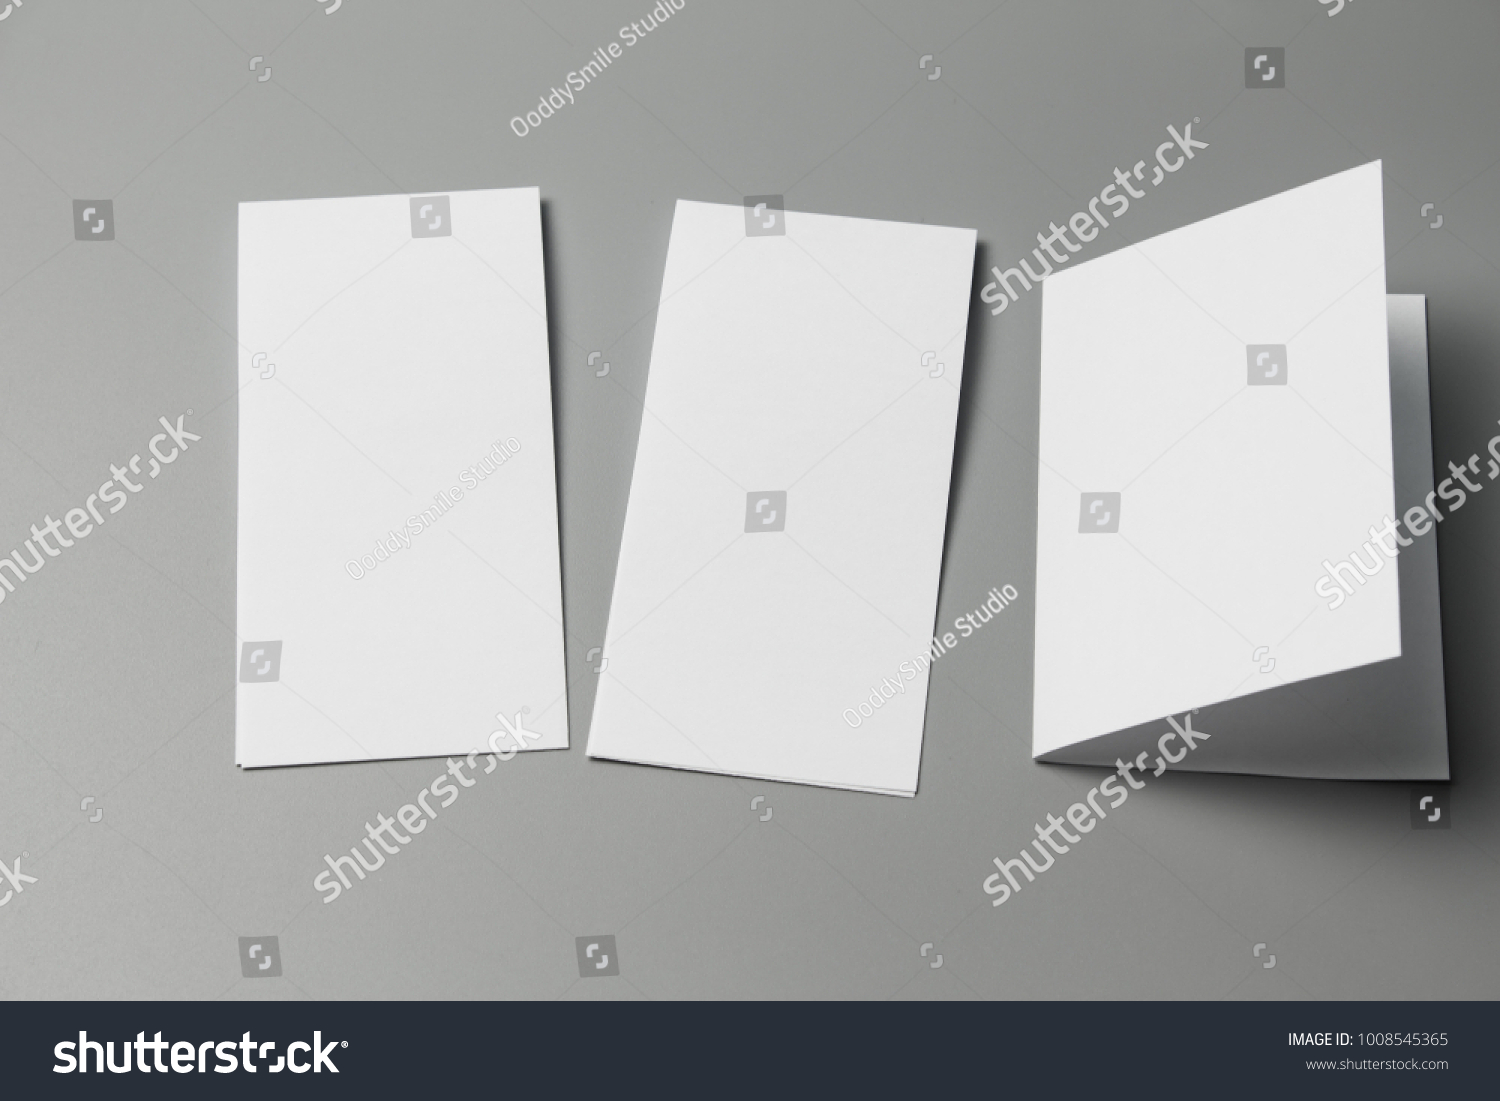 Blank portrait Mock-up paper. changeable background / white paper isolated on gray. identity design, corporate templates, company style, set of booklets, blank white folding paper flyer #1008545365